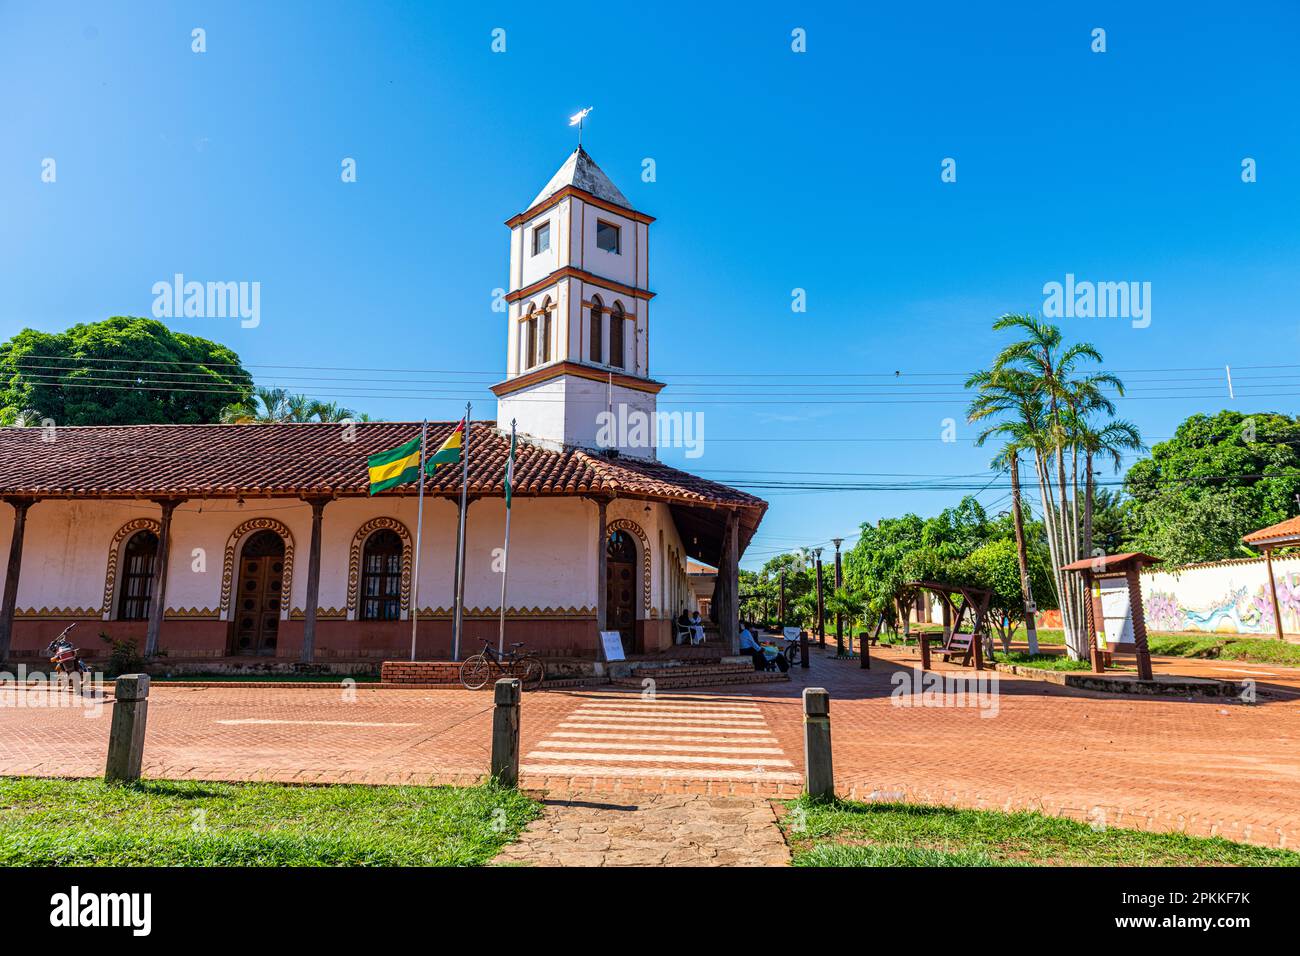 Old colonial house, Mission of Concepcion, Jesuit Missions of Chiquitos, UNESCO World Heritage Site, Santa Cruz department, Bolivia, South America Stock Photo